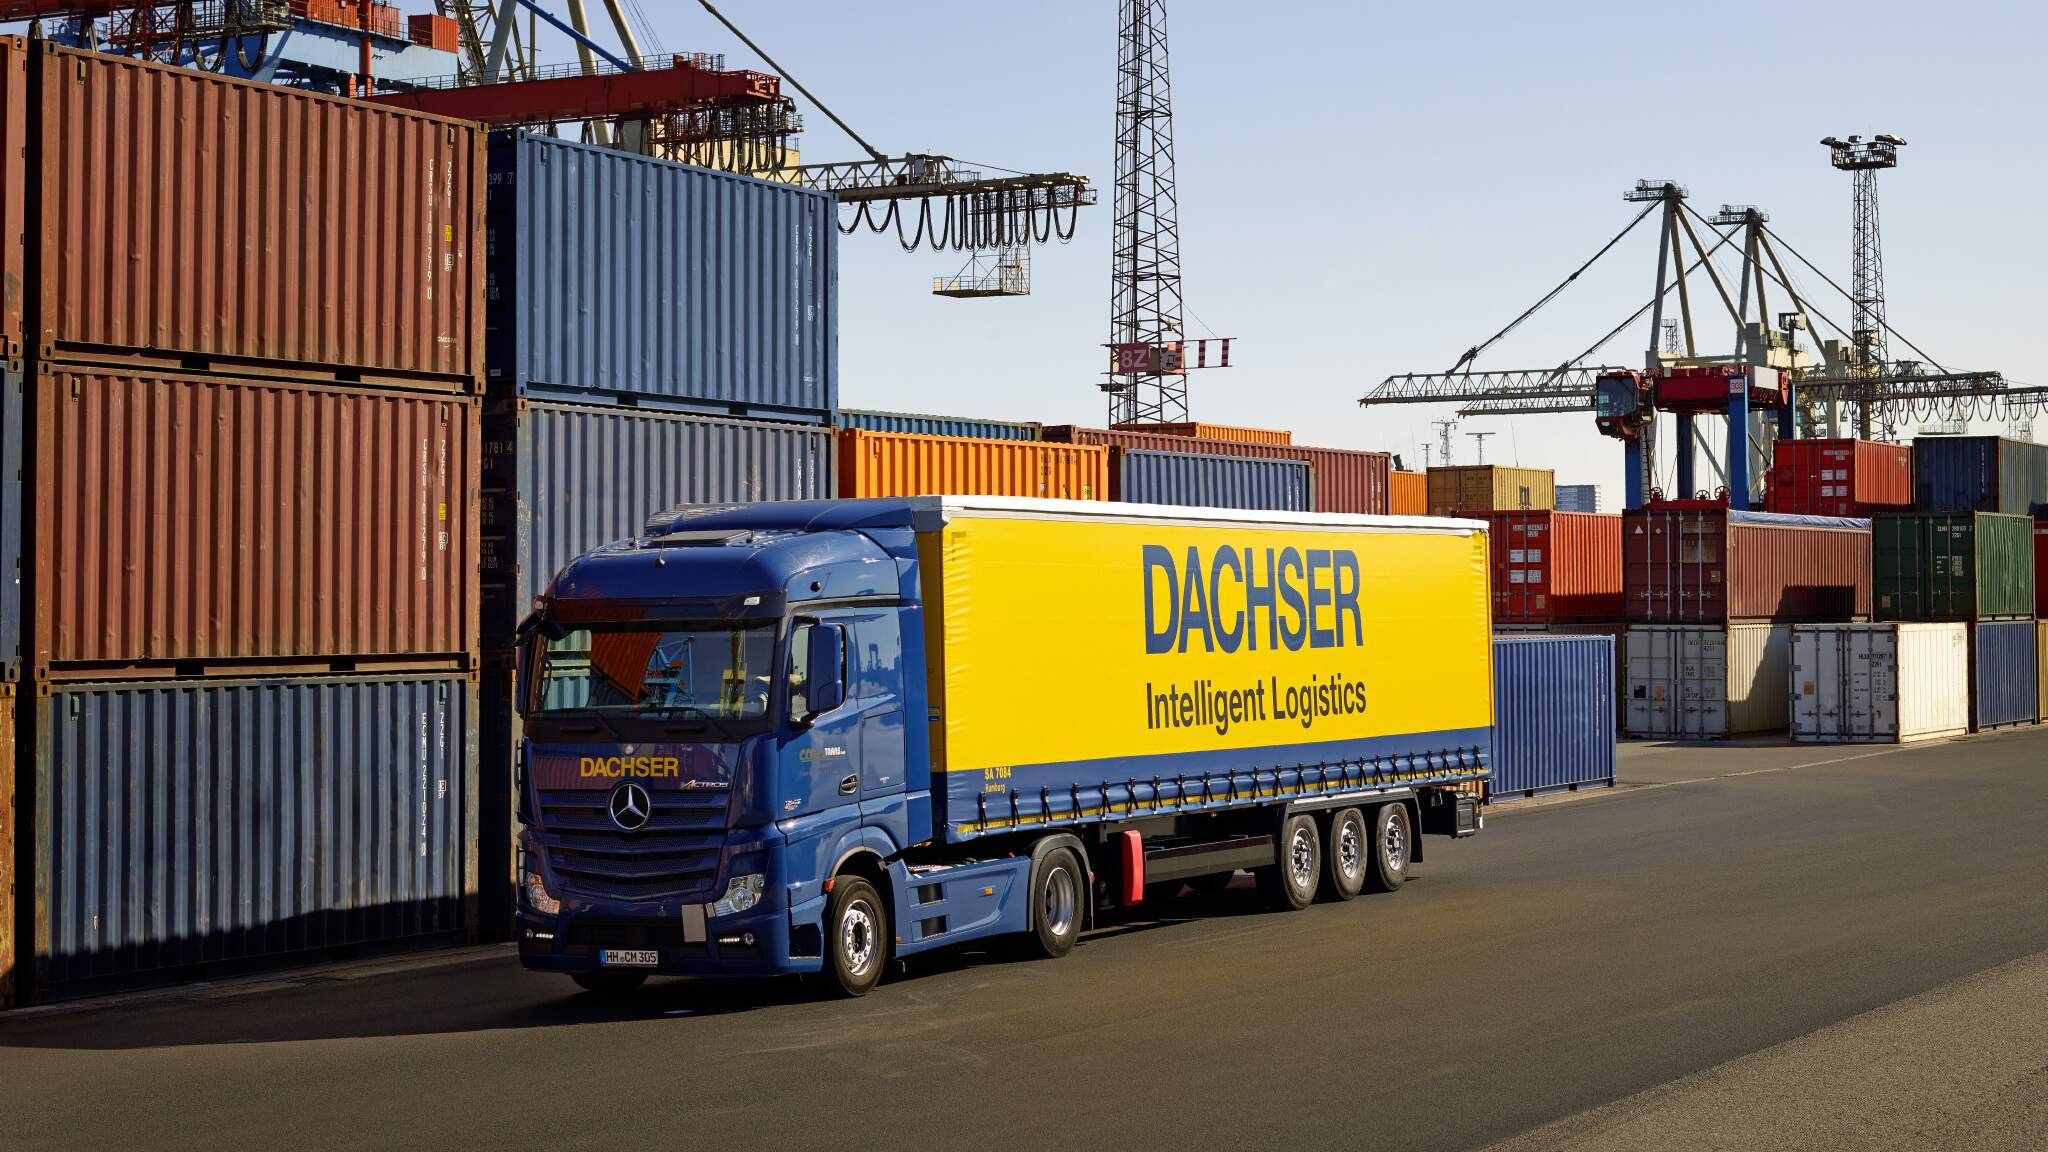 With experience, manpower, and digital technologies, a special industry solution such as DACHSER DIY Logistics will become a one-stop shop for all transport and logistics requirements.